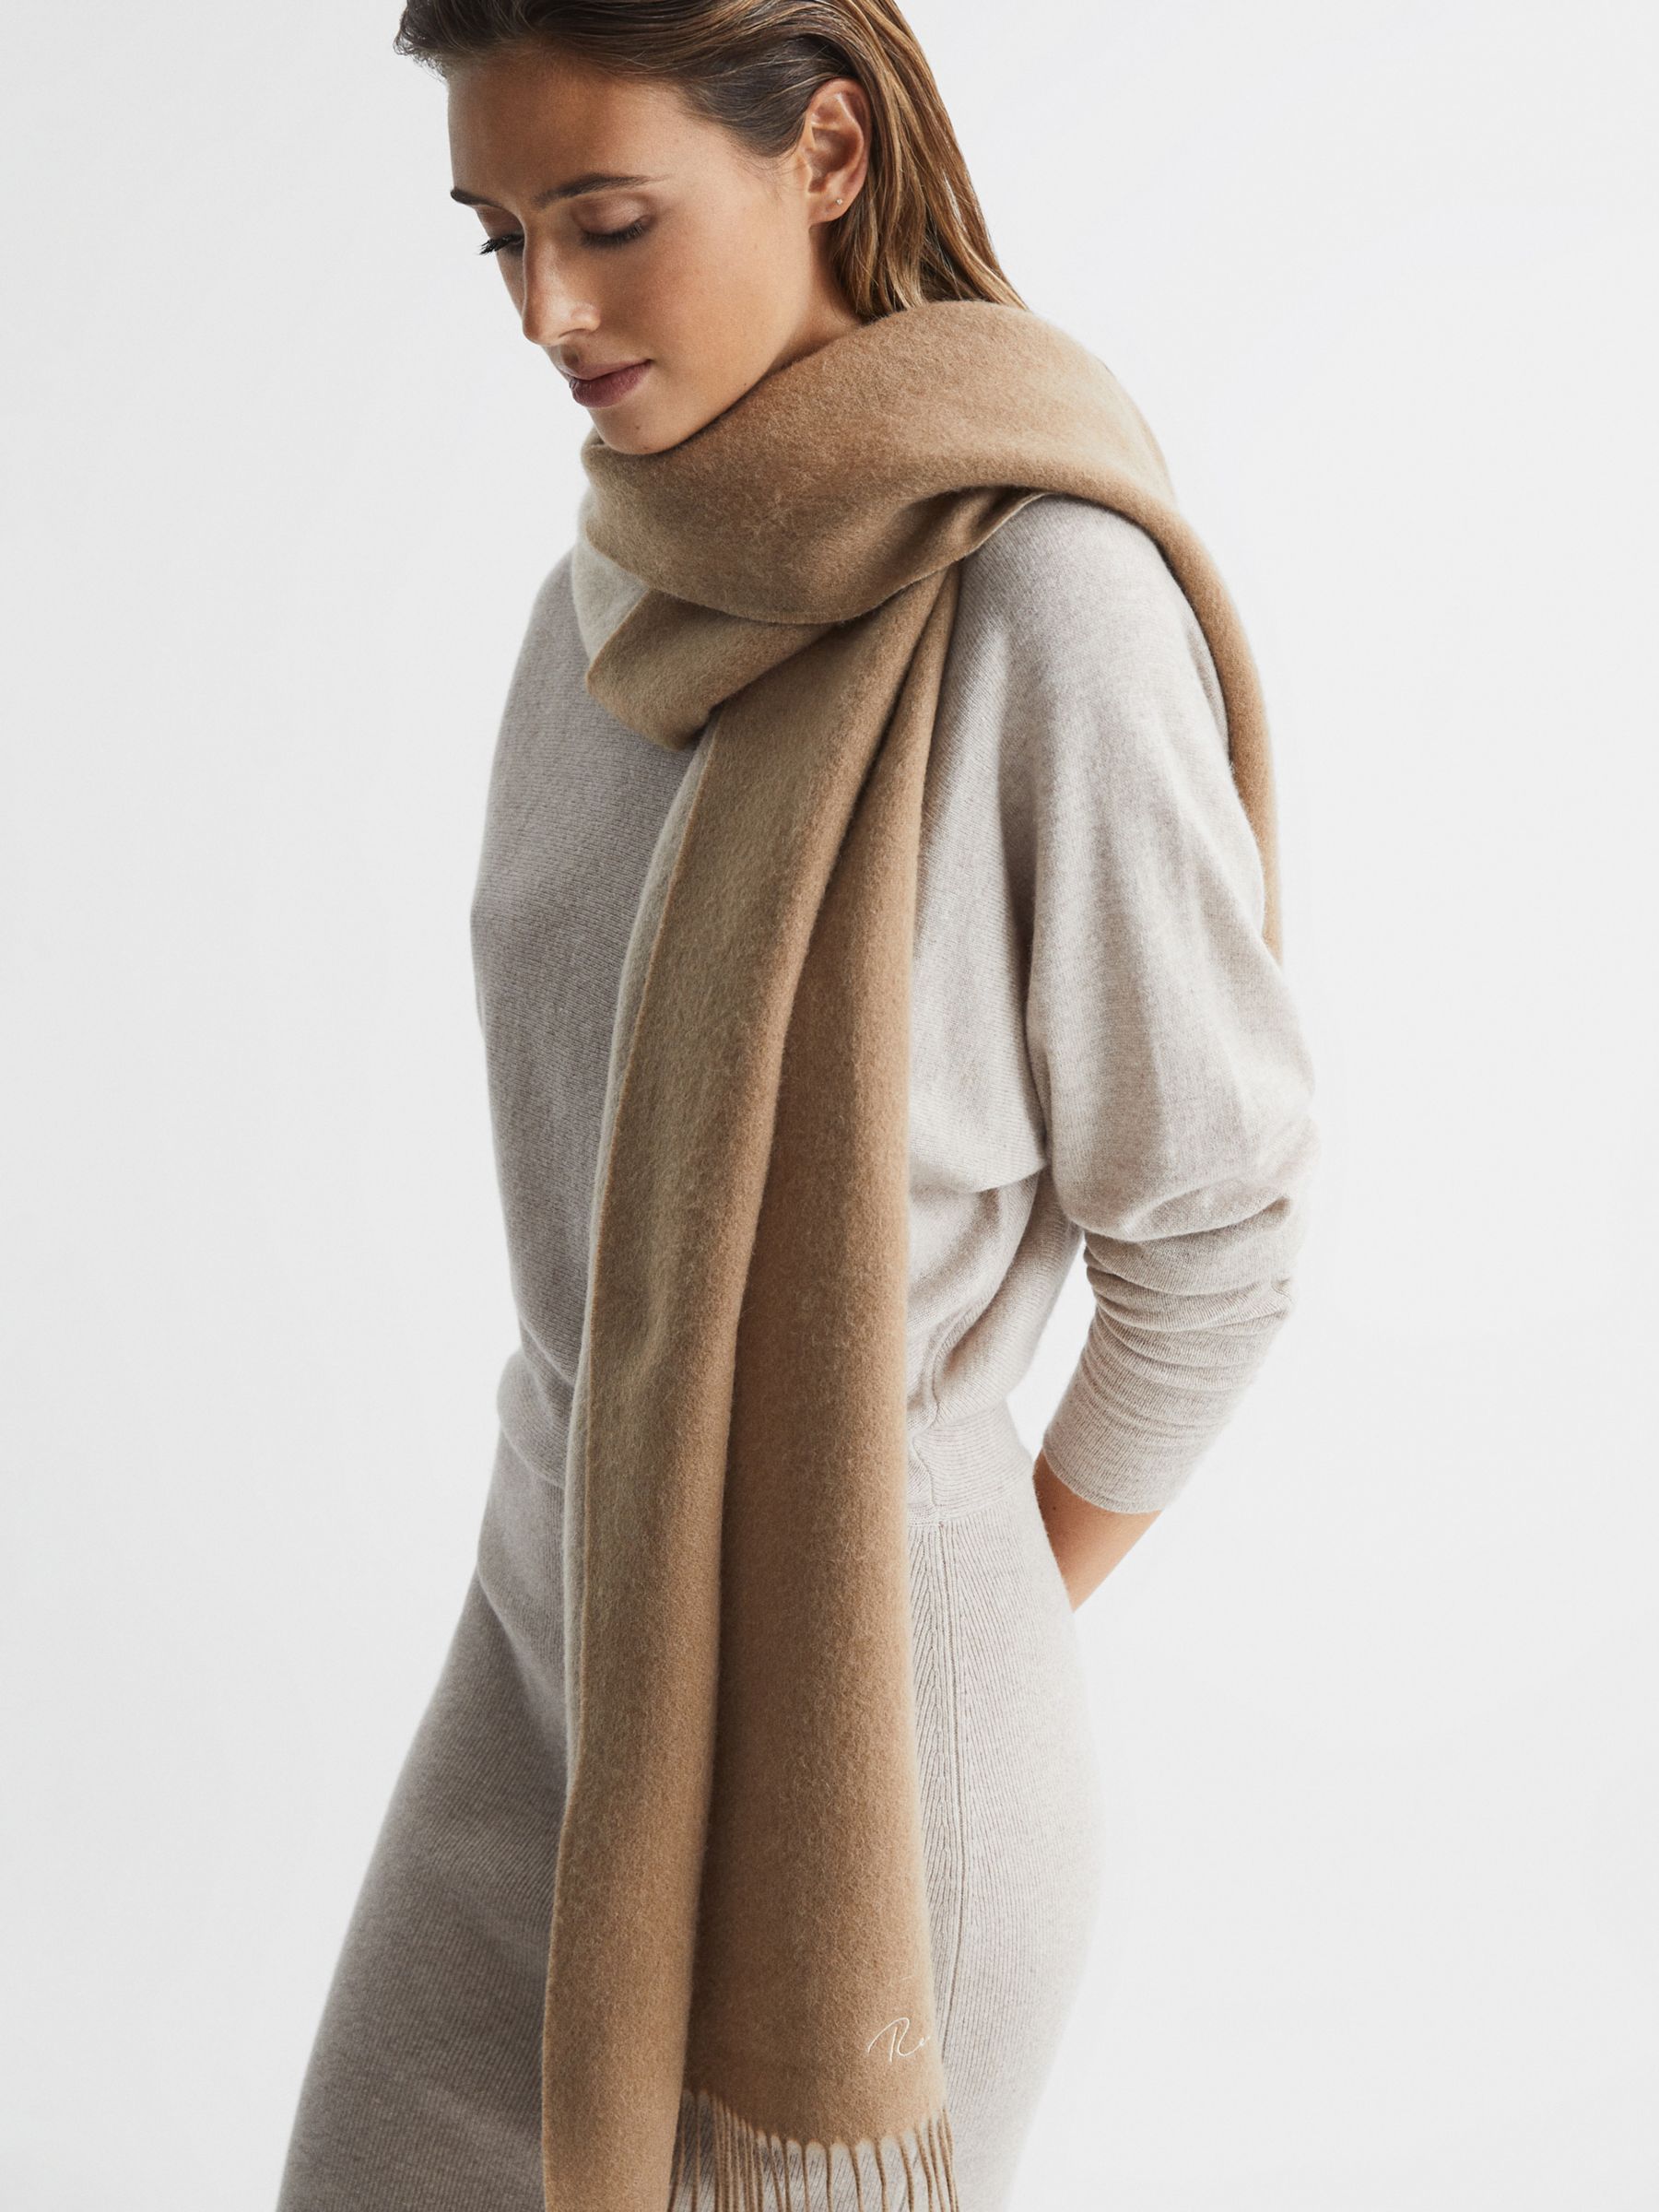 Reiss Picton Cashmere Blend Scarf, Camel at John Lewis & Partners